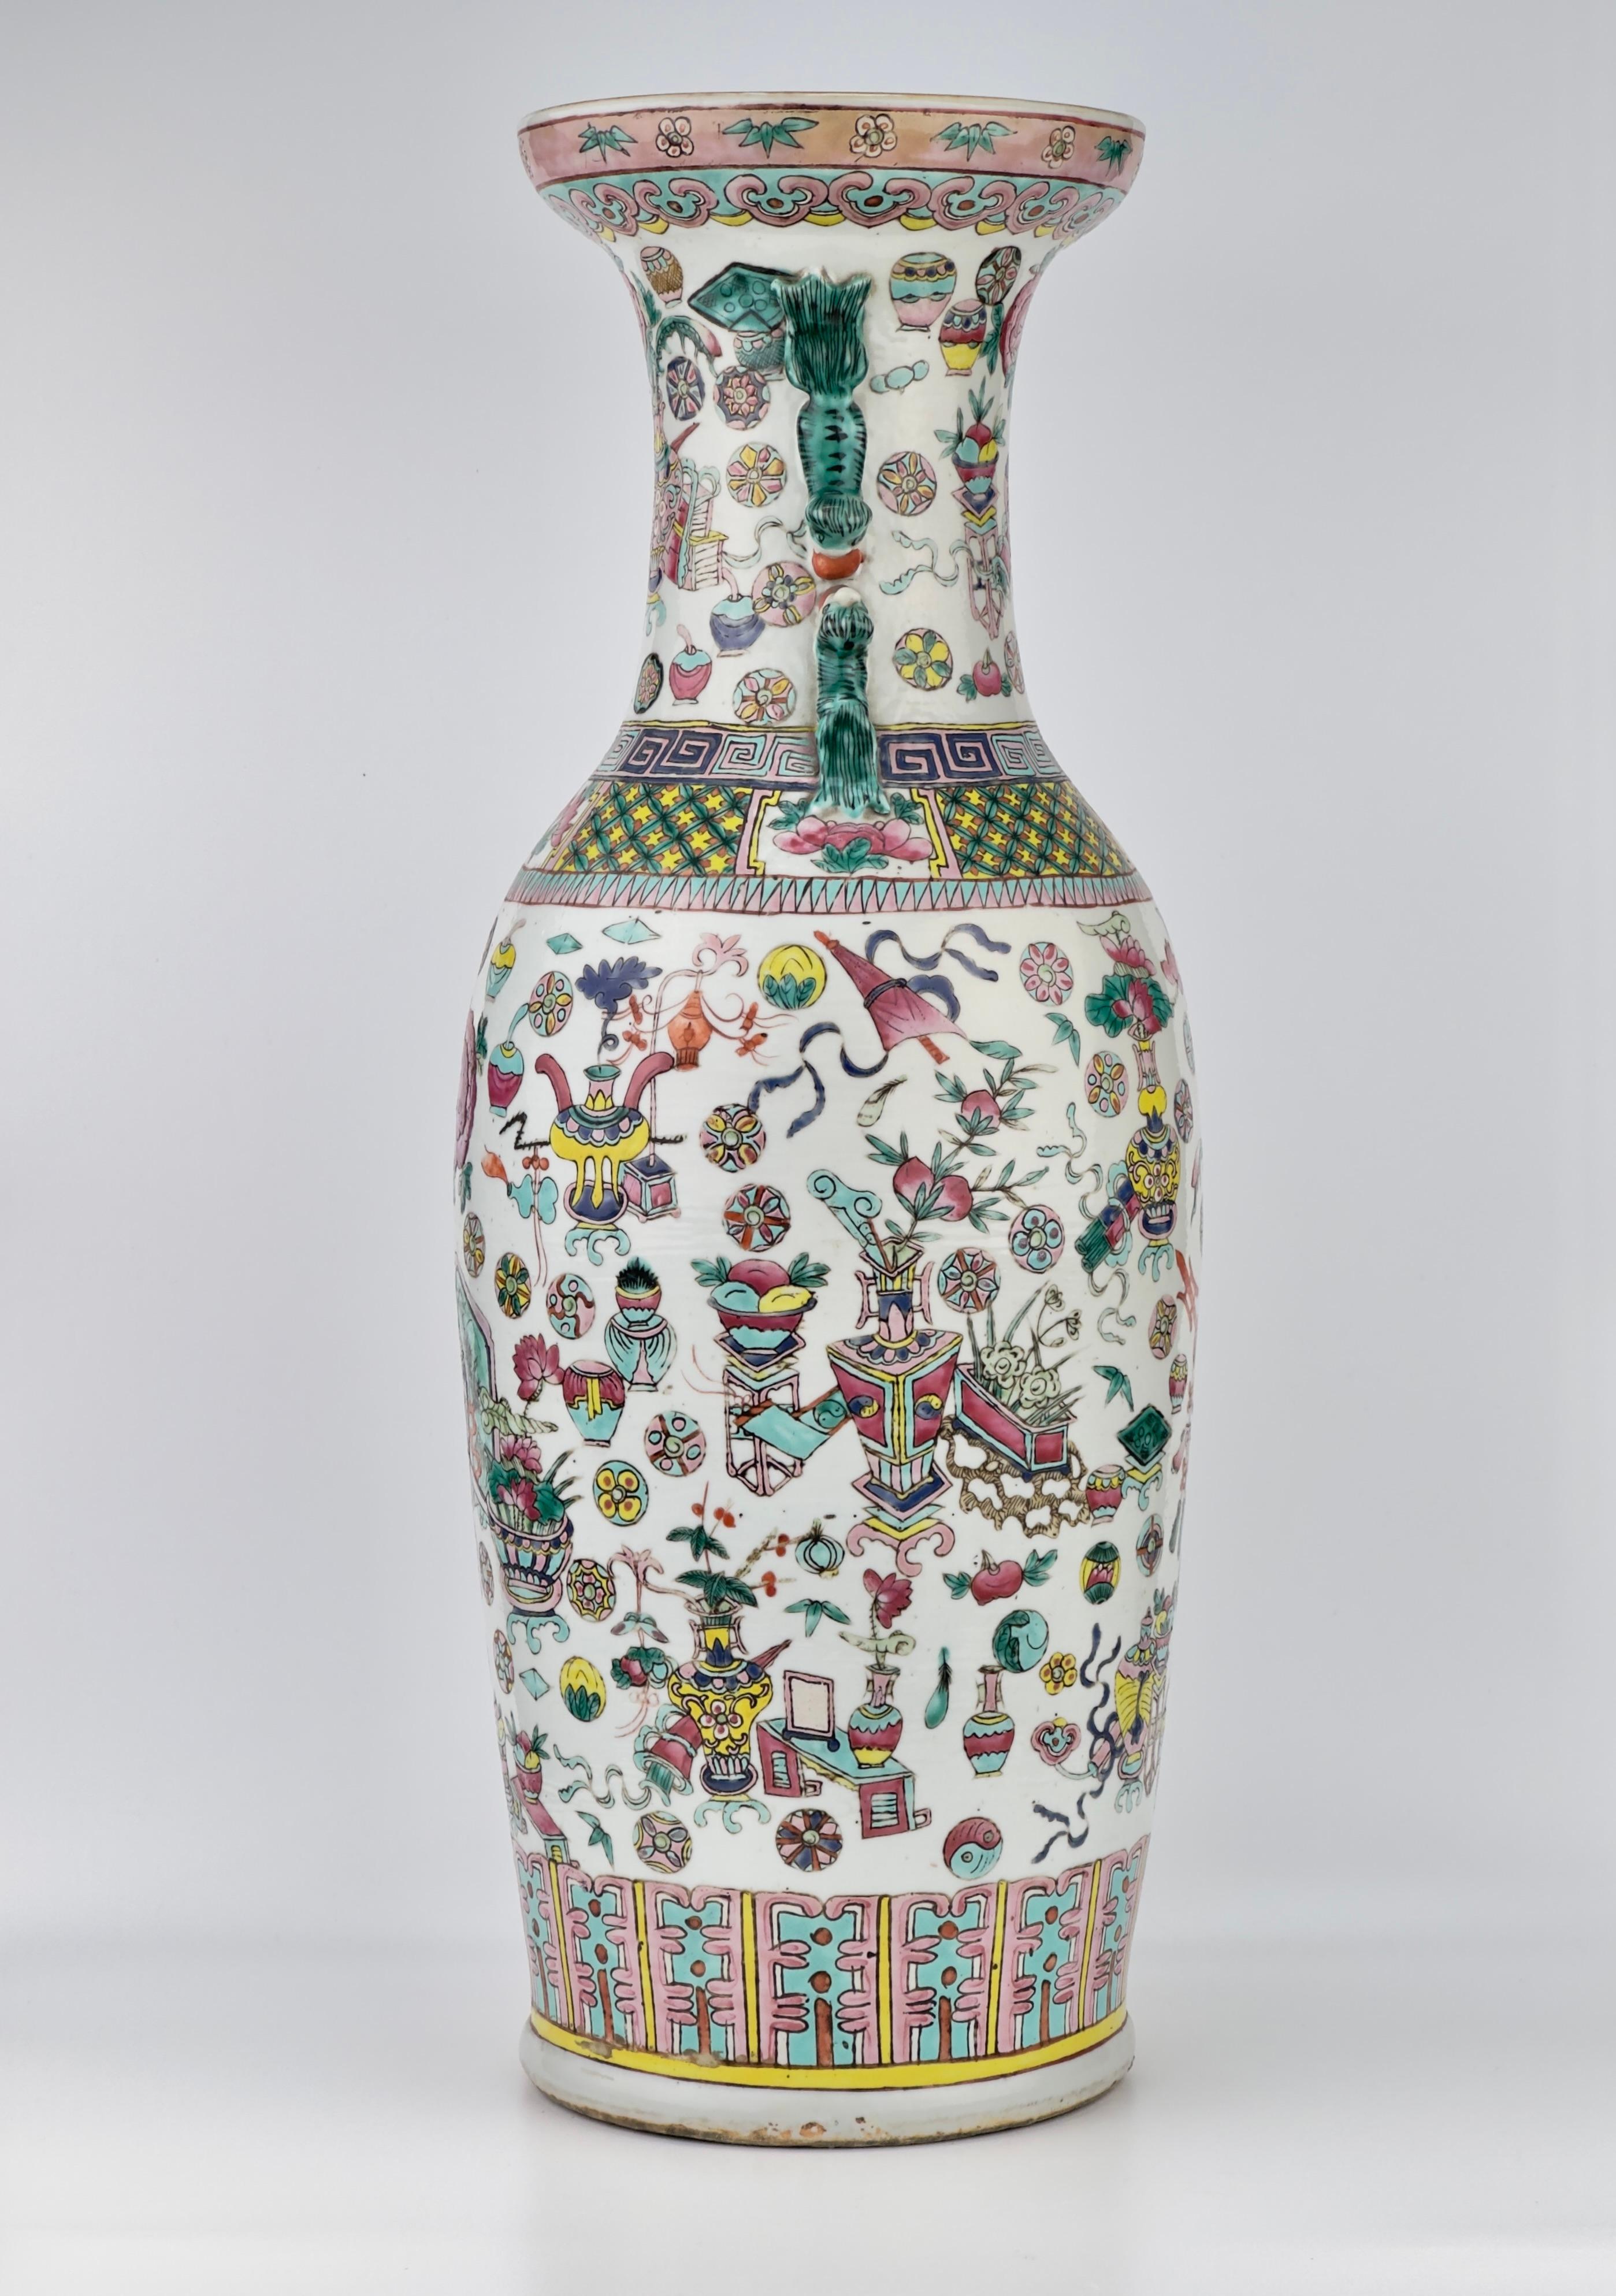 Chinese famille rose vase, decorated with 'One Hundred Antiquities' design, paired with Fu-lion handles. (Have two in pairs. If you would like to purchase as a set, please send me a message.)

Period: Qing Dynasty(19th century)
Type: Vase
Medium: